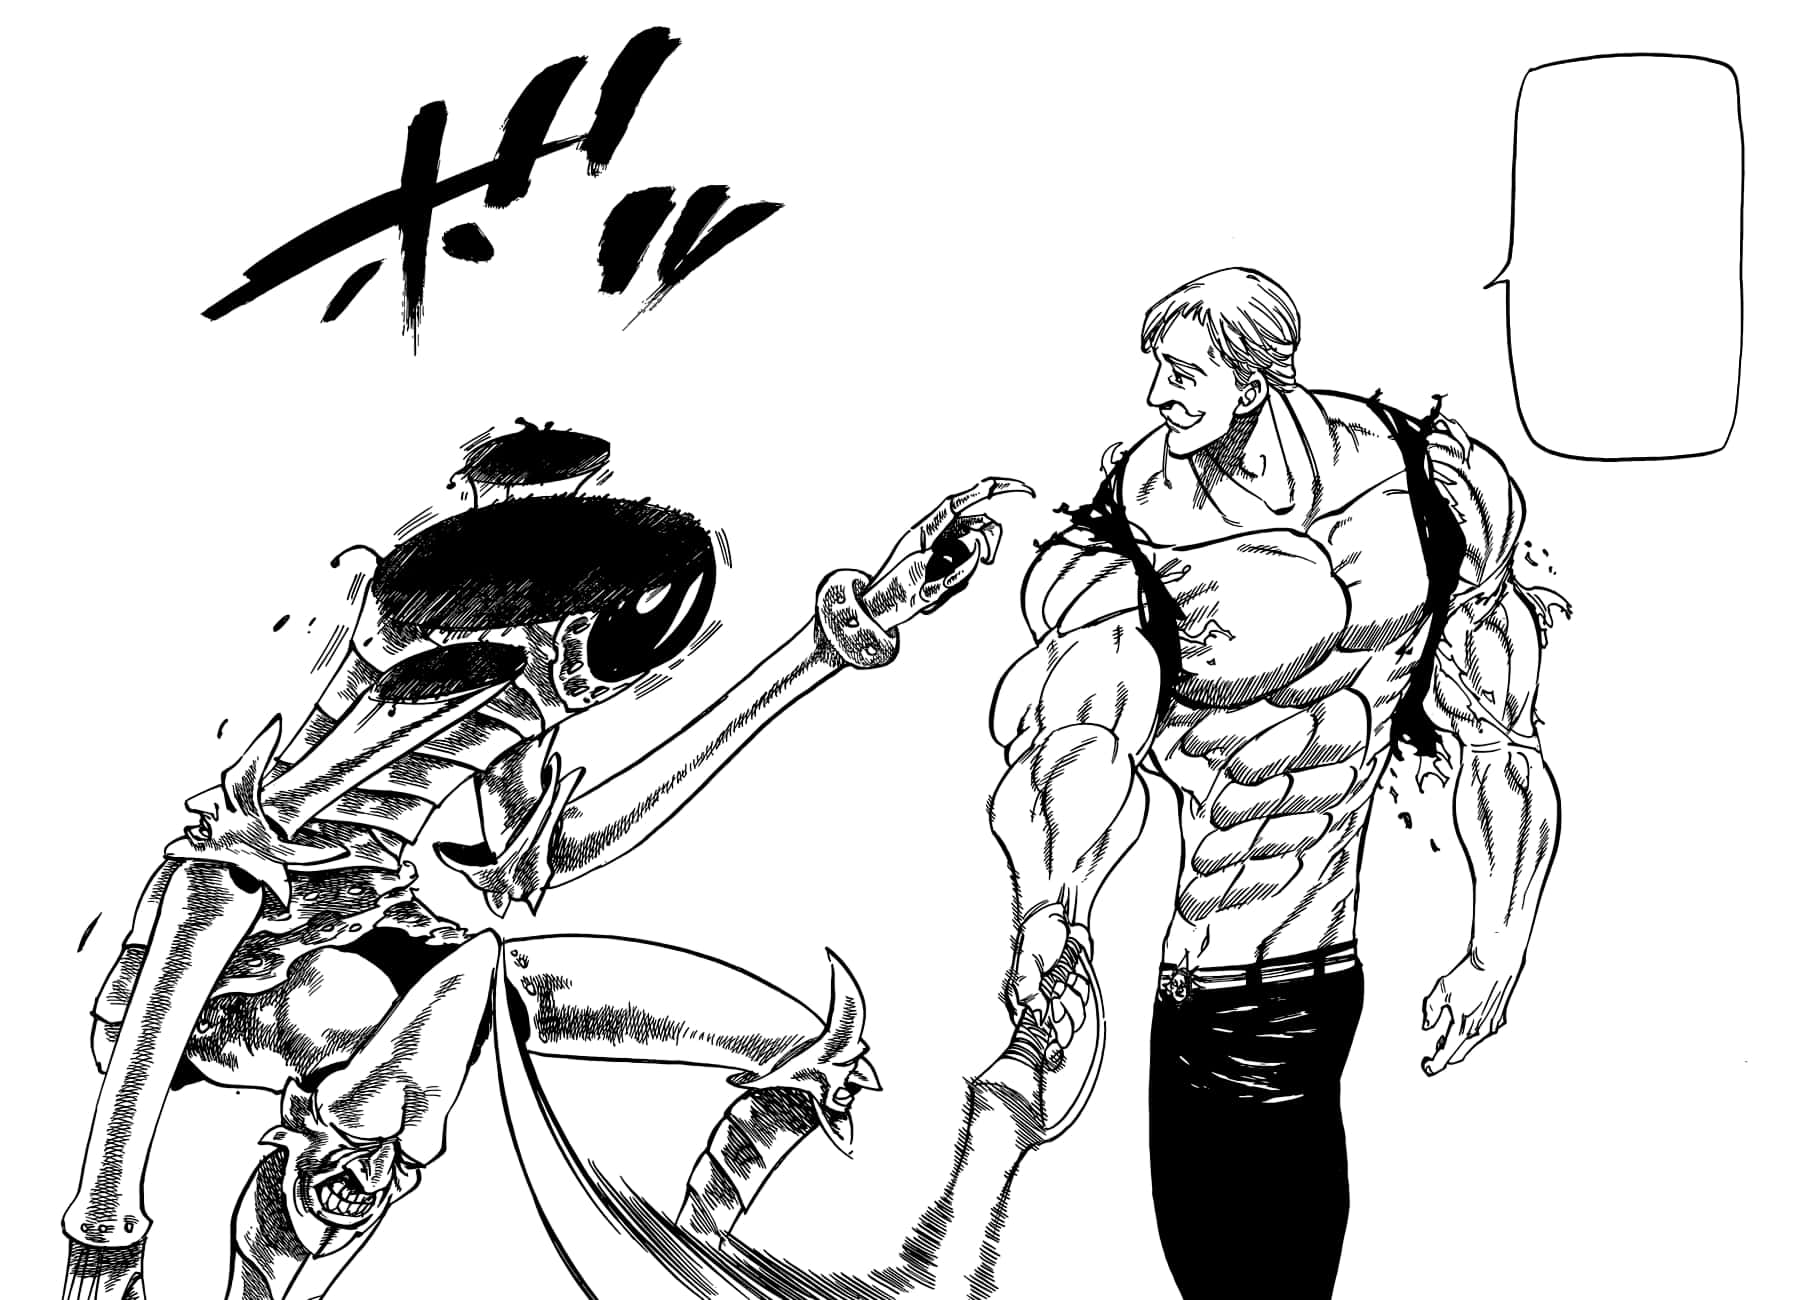 Escanor poses with an intimidating attitude